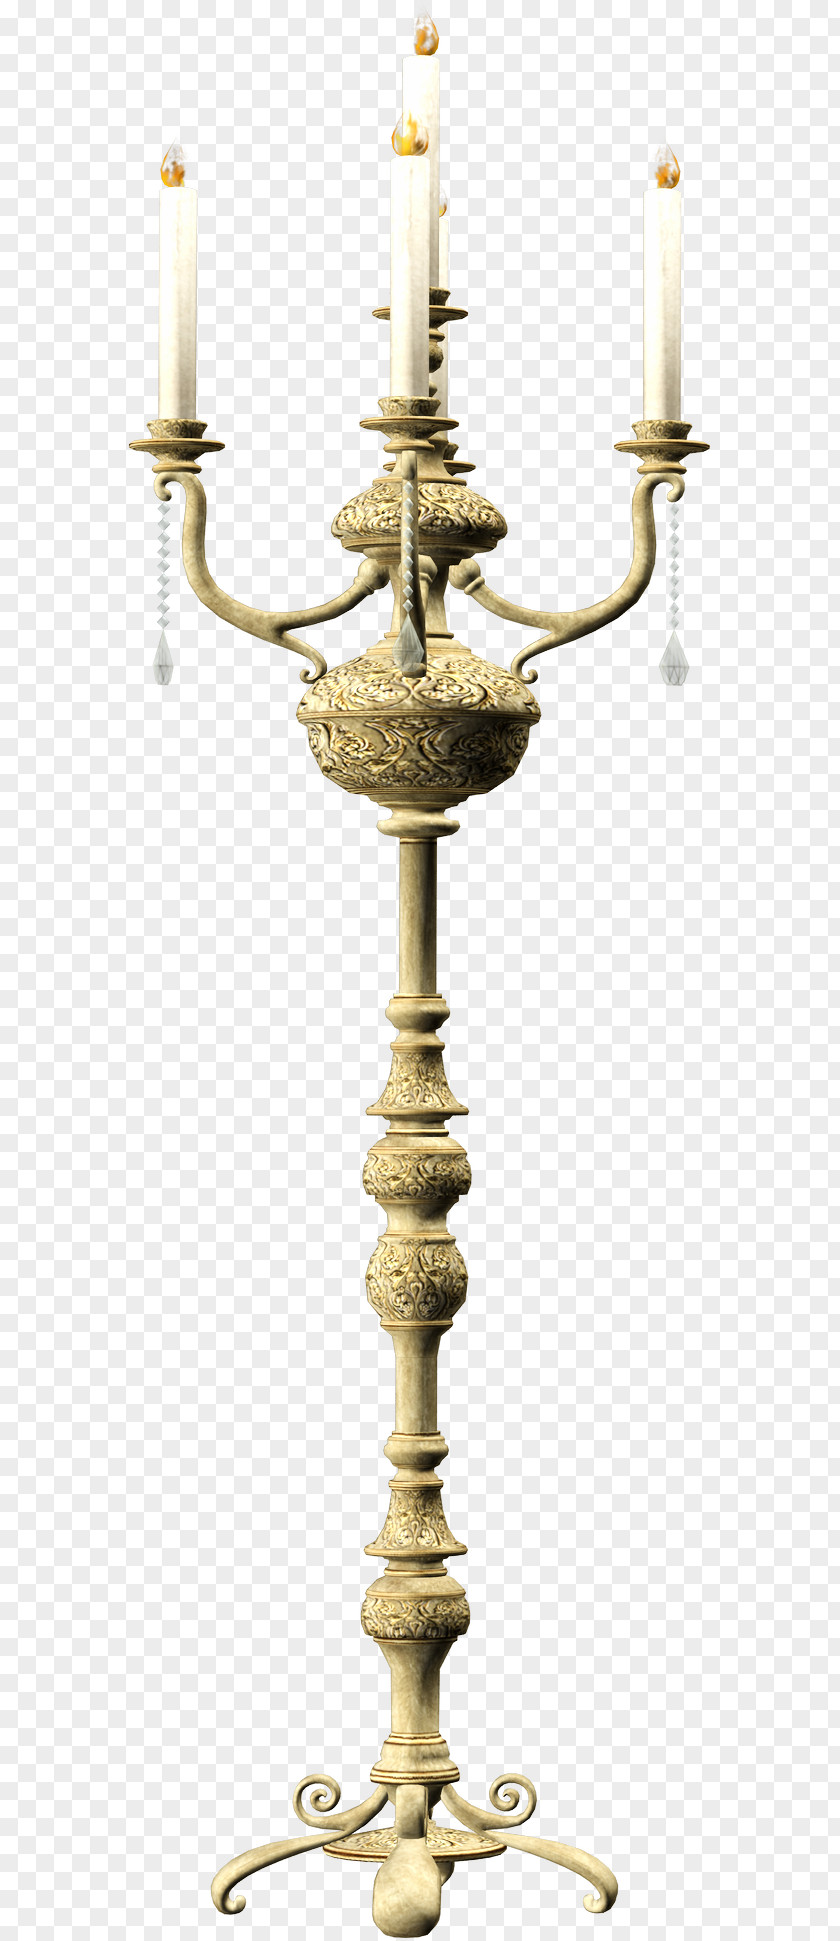 Candles Candlestick PNG